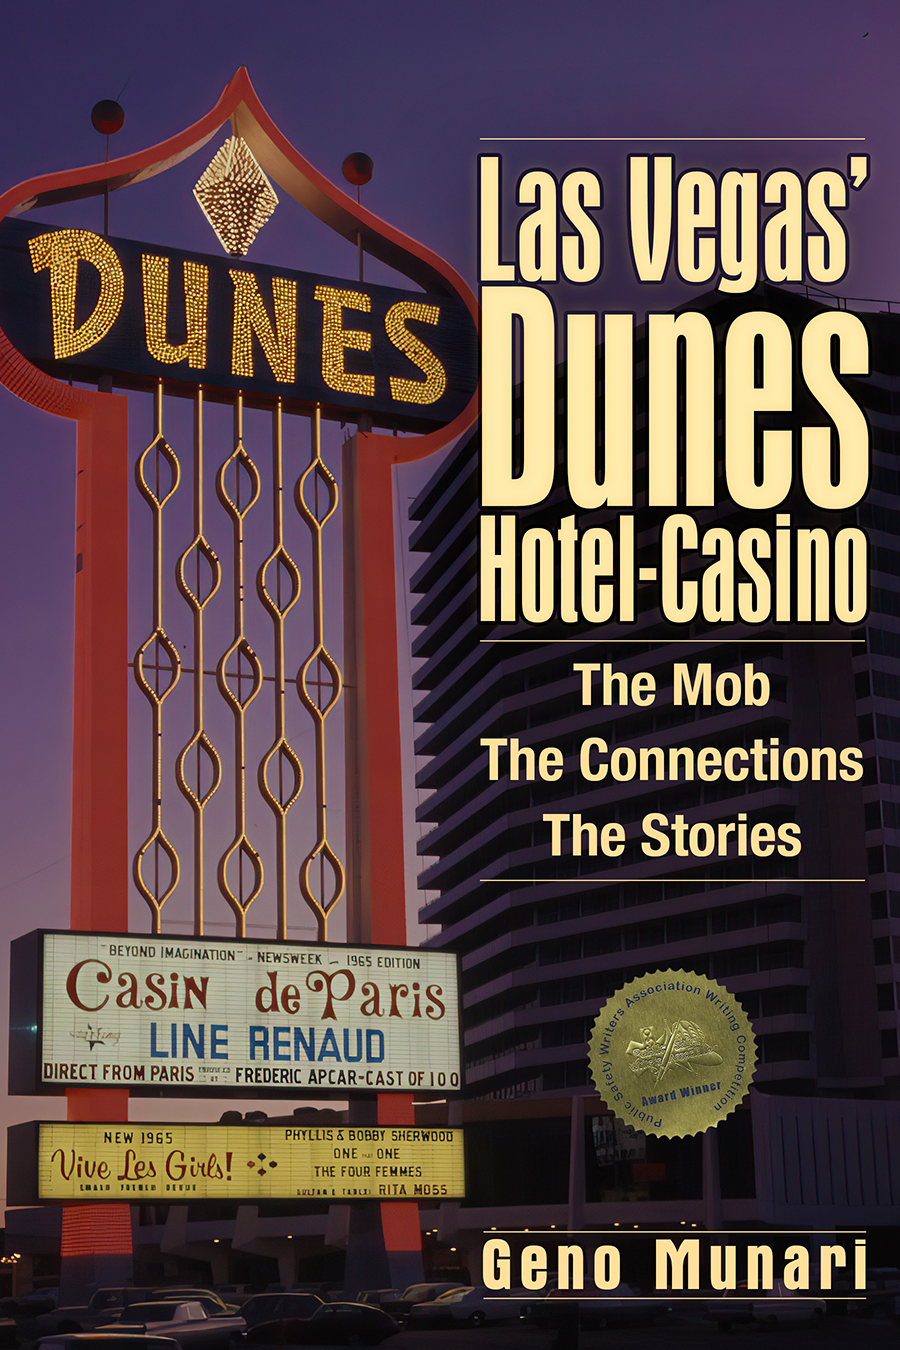 The Dunes Hotel and Casino The Mob The Connections The Stories Copyright - photo 1